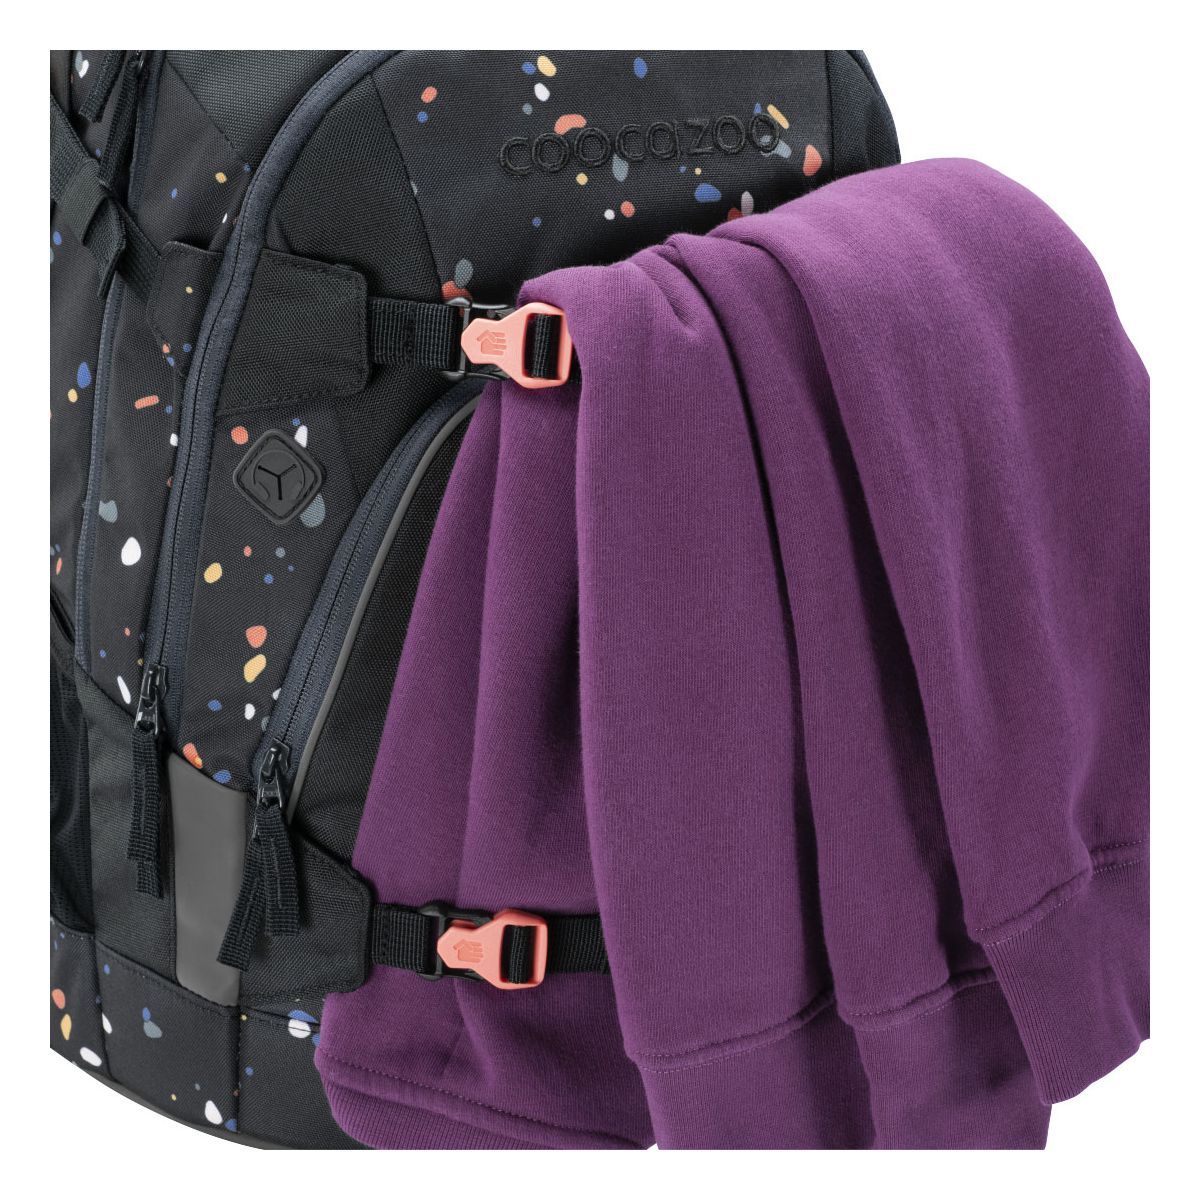 Coocazoo Mate Sprinkled Candy Schulrucksack